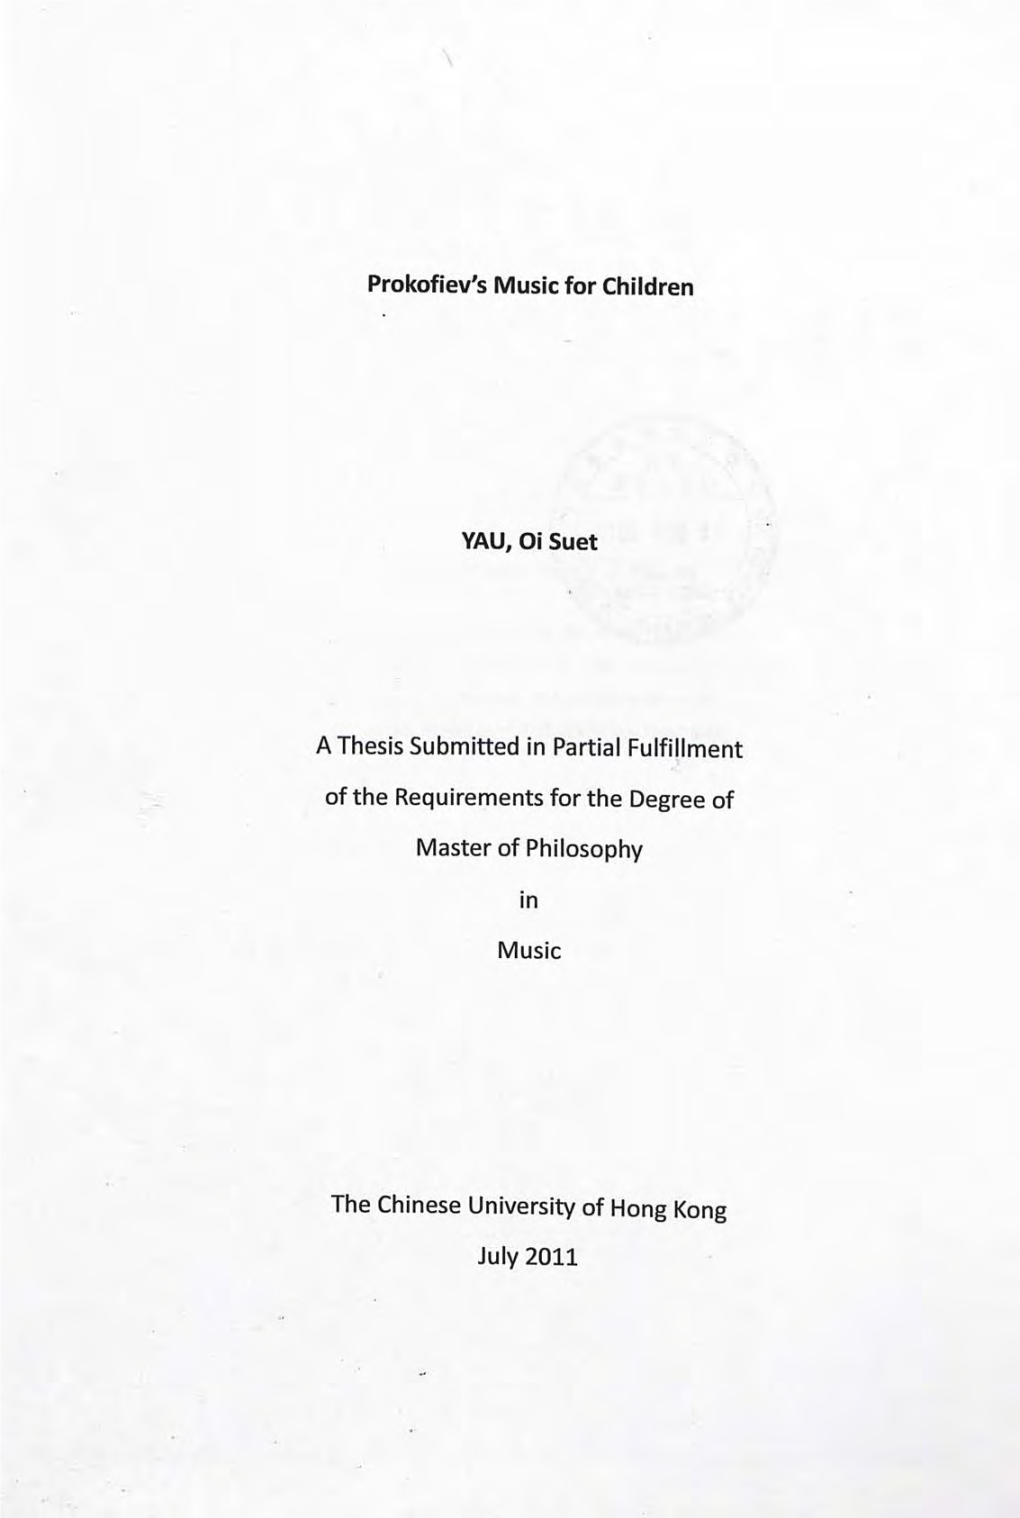 Prokofiev's Music for Children YAU, Oi Suet a Thesis Submitted in Partial Fulfillment of the Requirements for the Degree of Mast